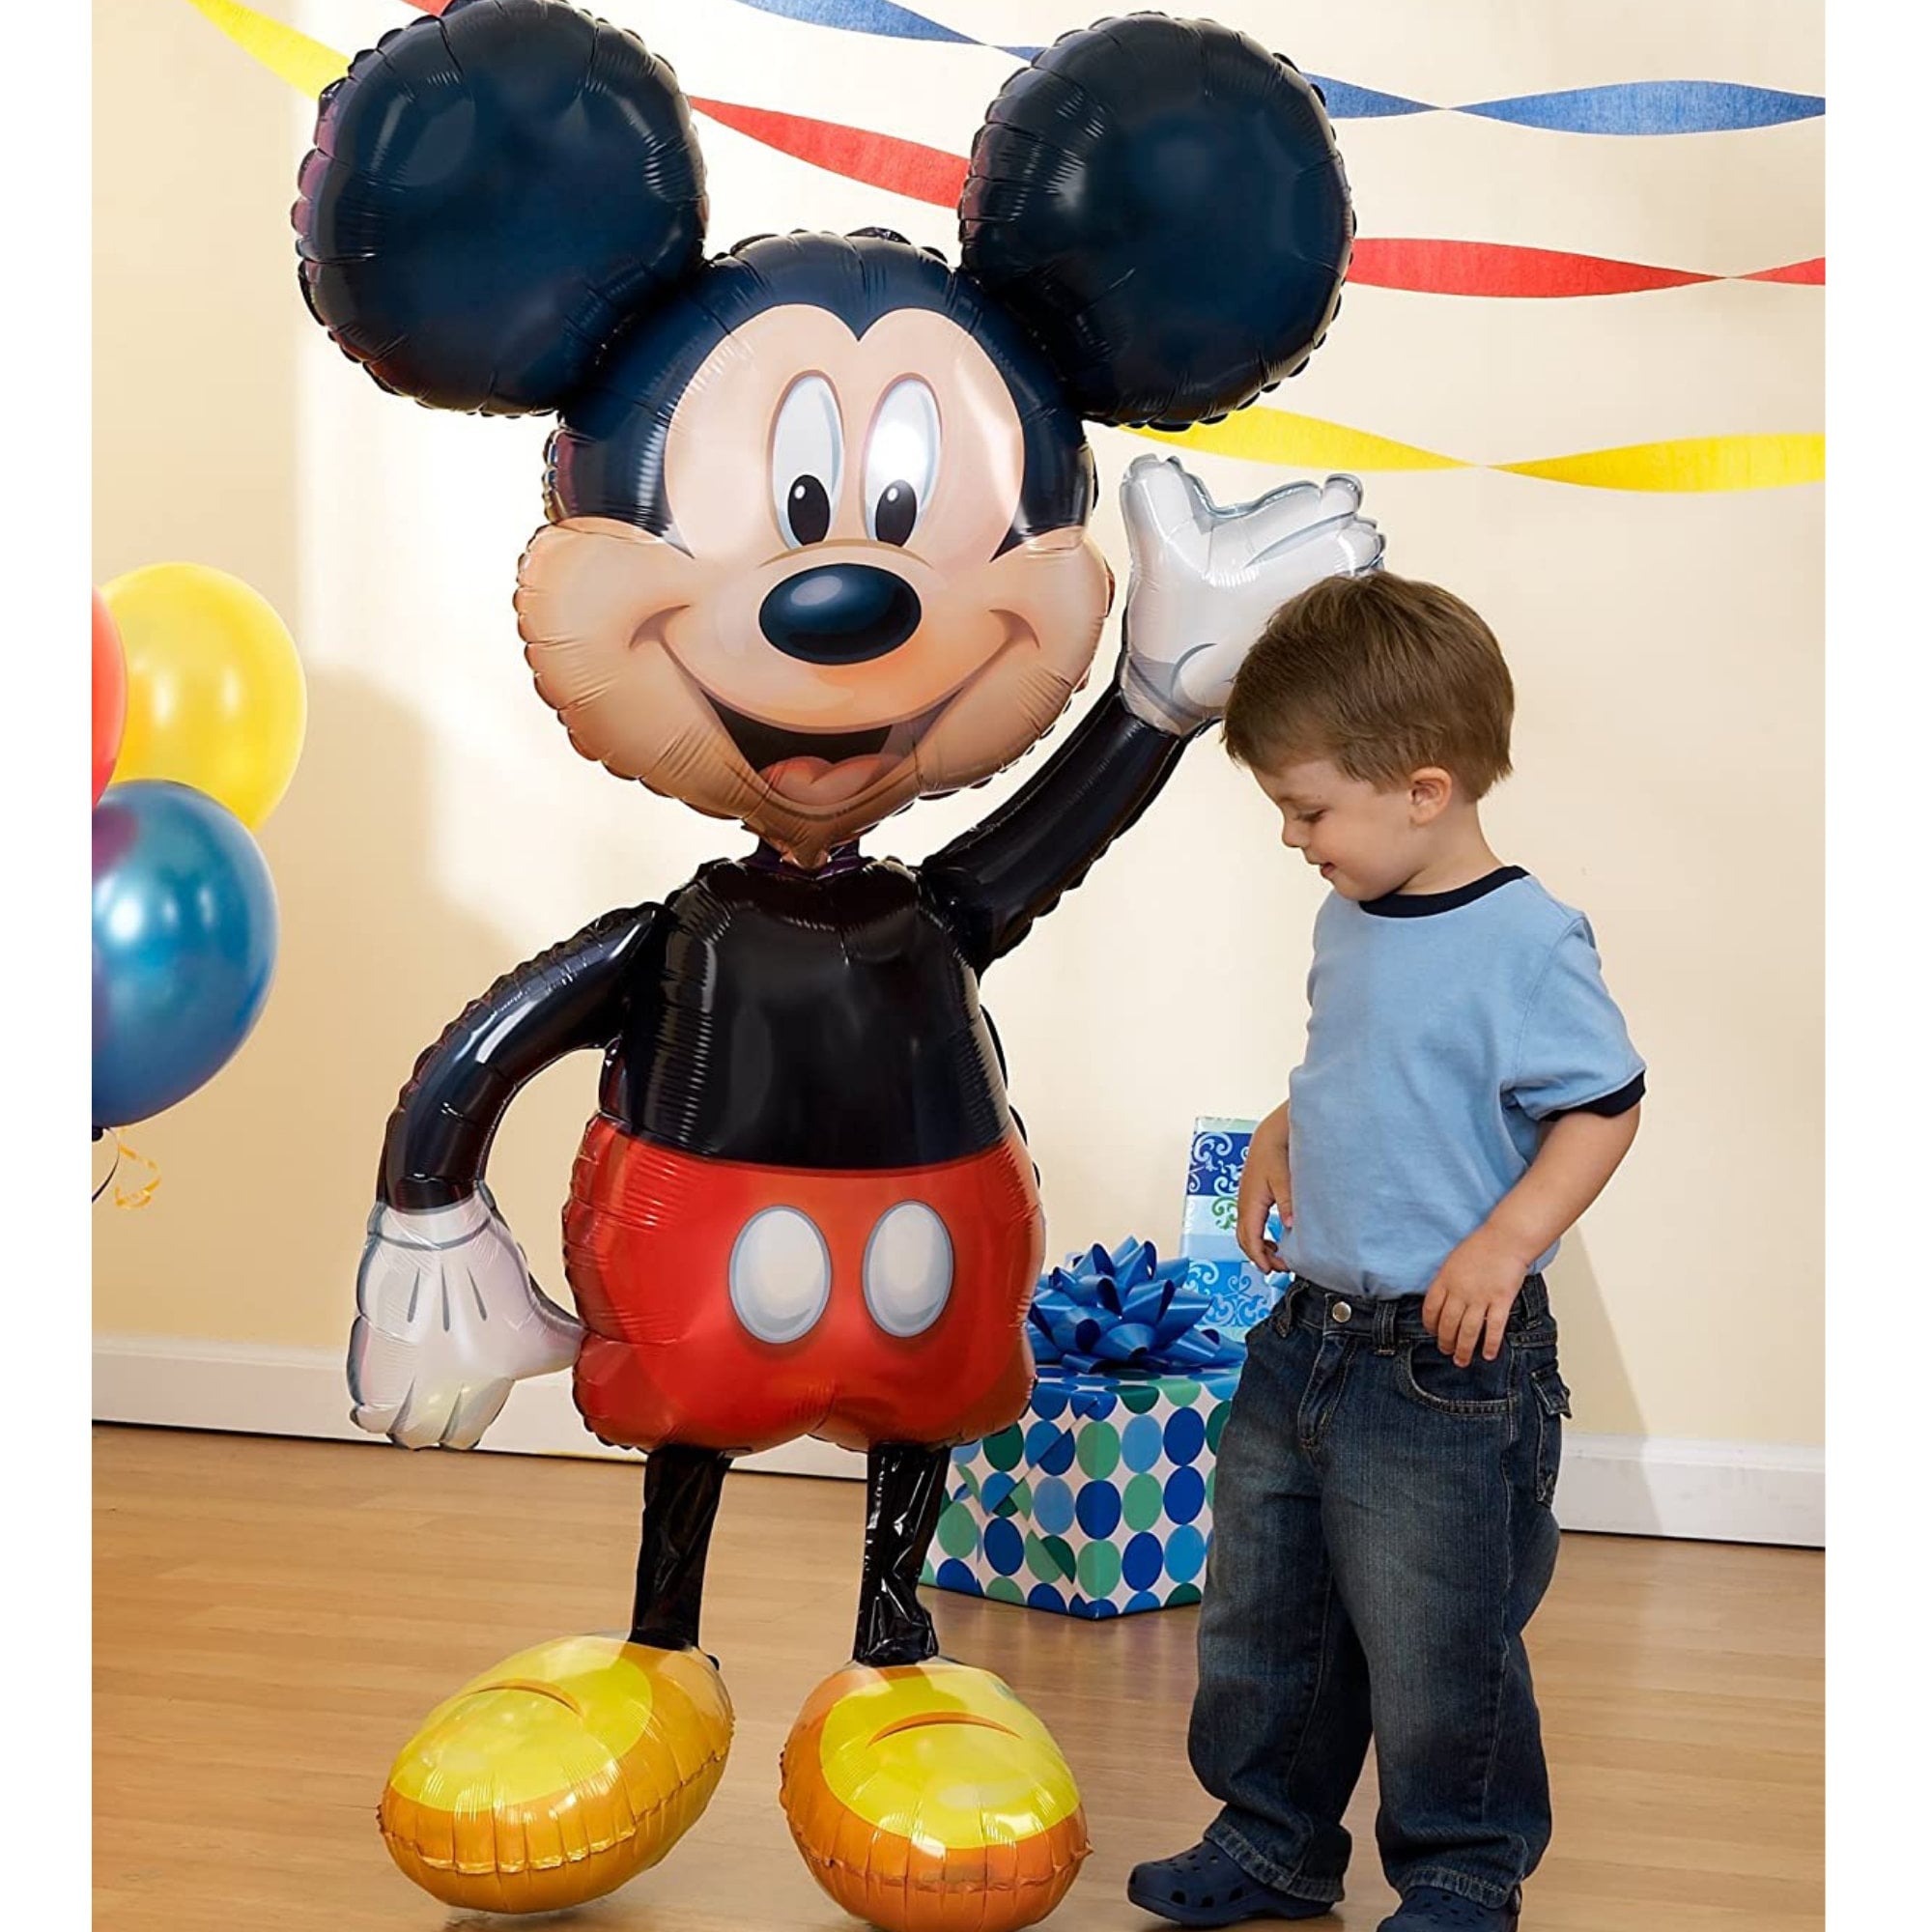 Mickey Mouse Balloon Arch - PARTY BALLOONS BY Q